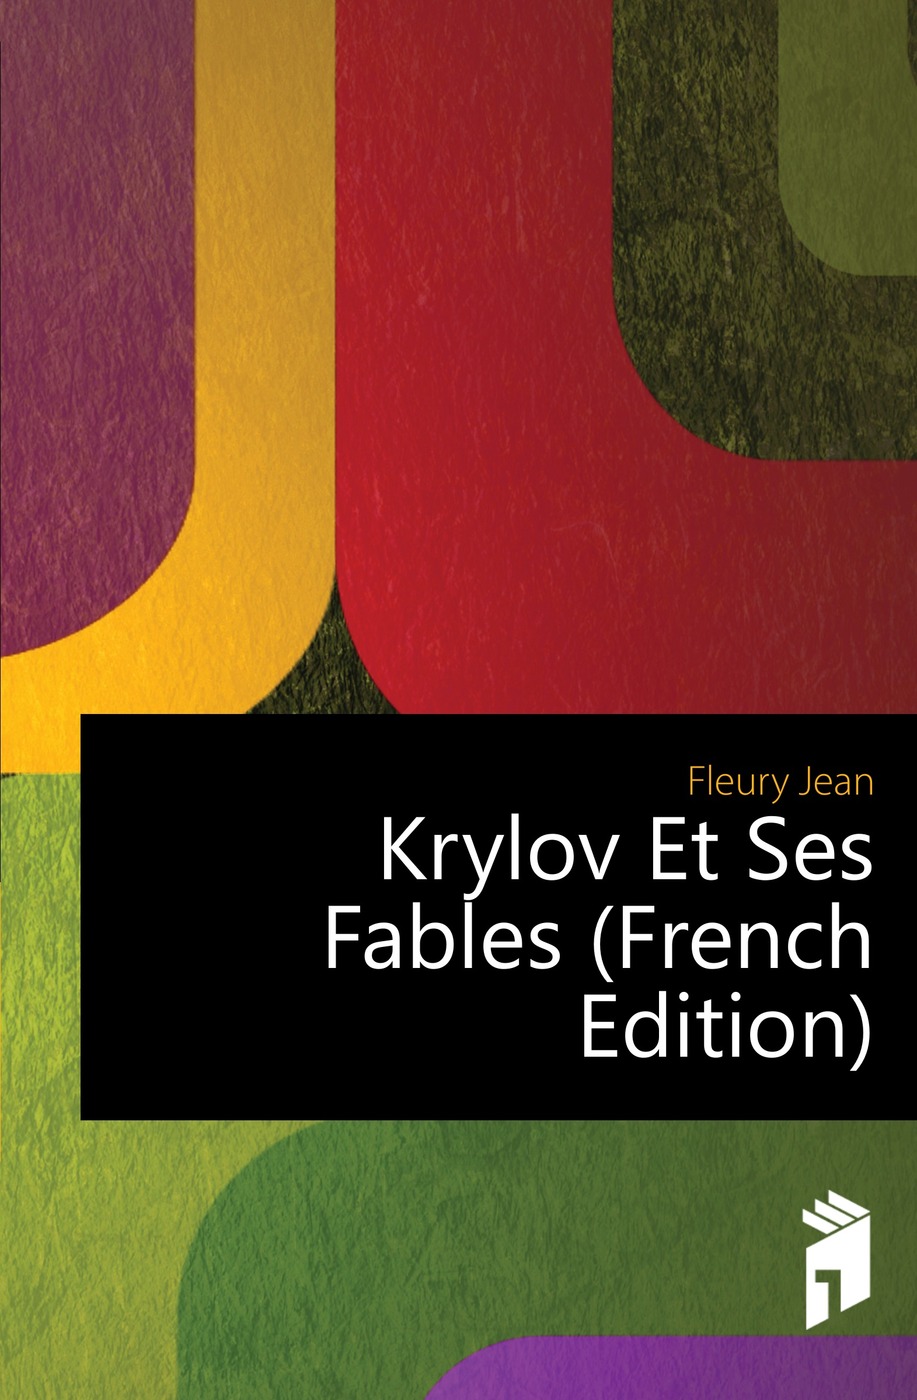 Krylov Et Ses Fables (French Edition)